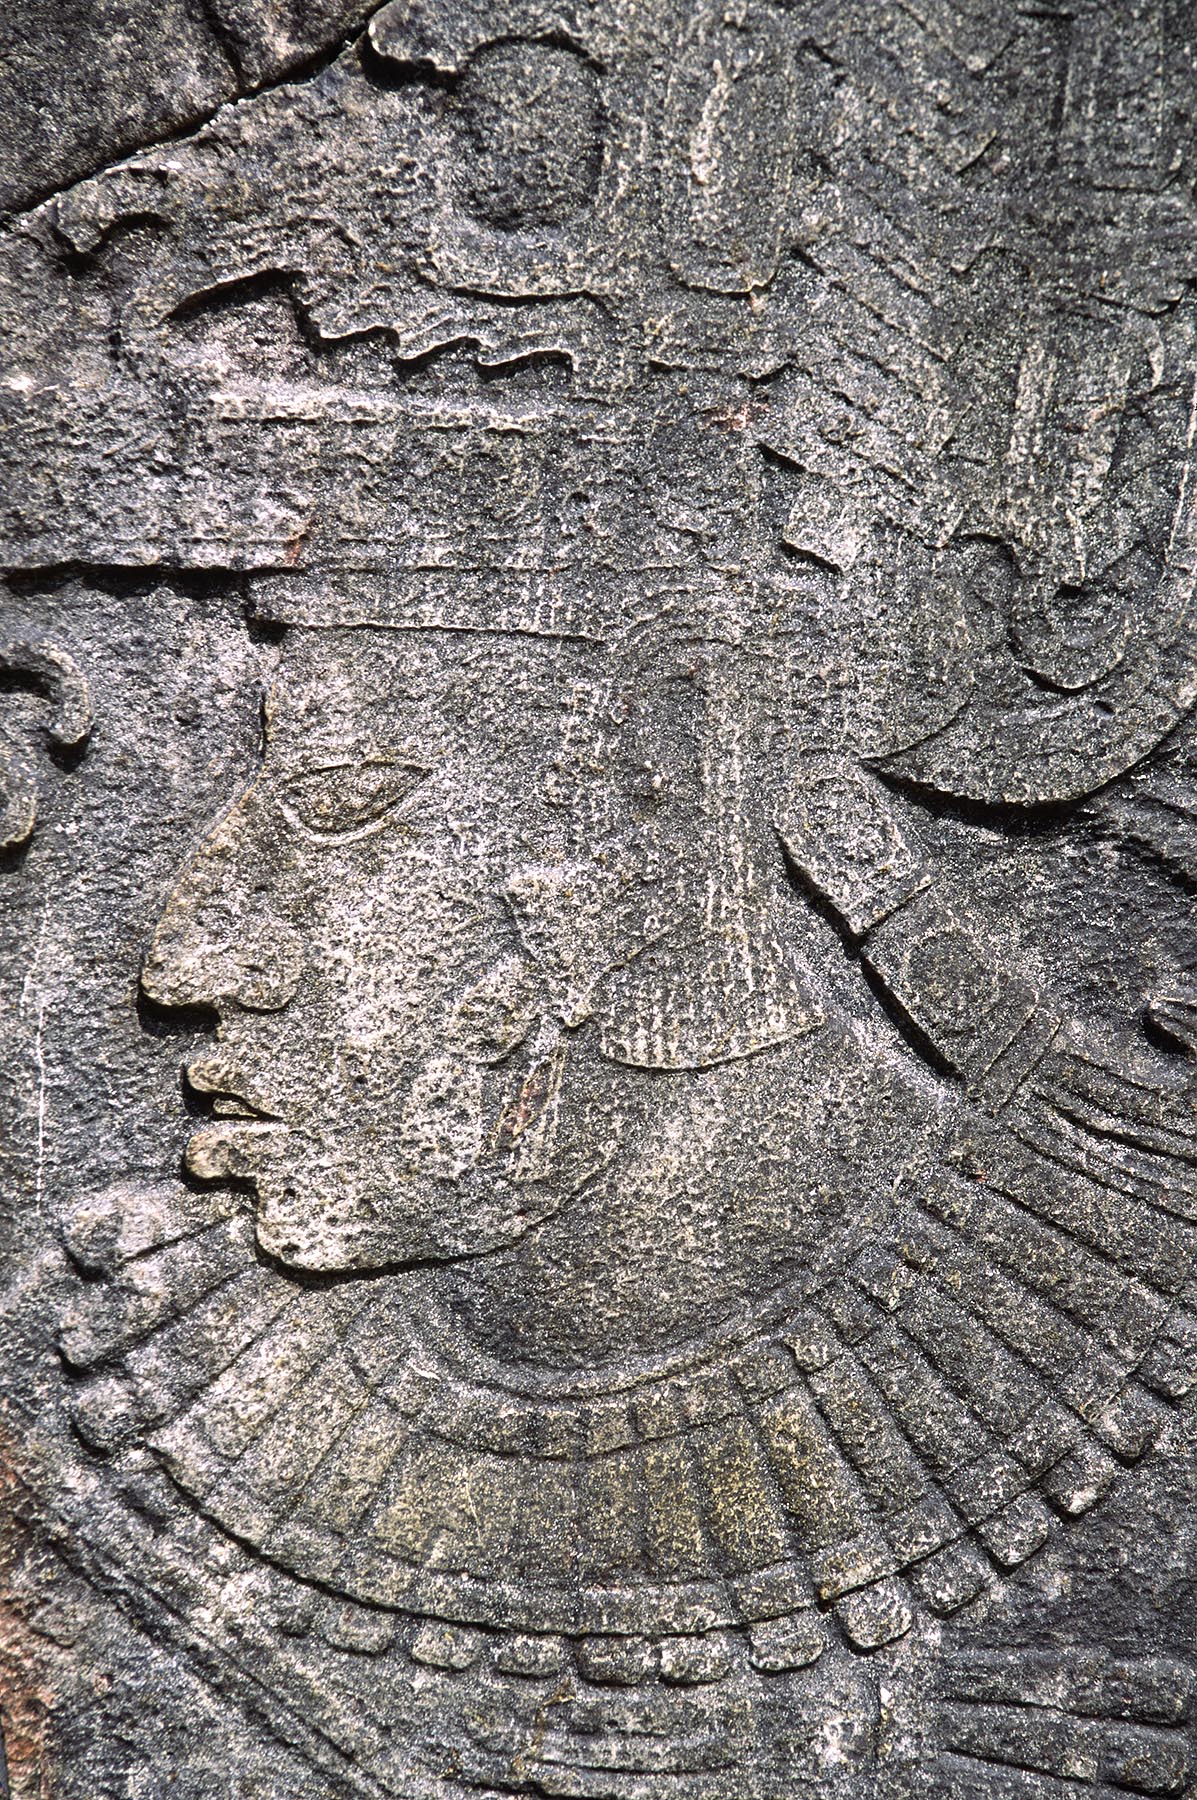 STELA 14, 870 AD, depicts a MAYA RULER from the LATE CLASSIC PERIOD - SEIBAL (CEIBAL) RUINS, GUATEMALA